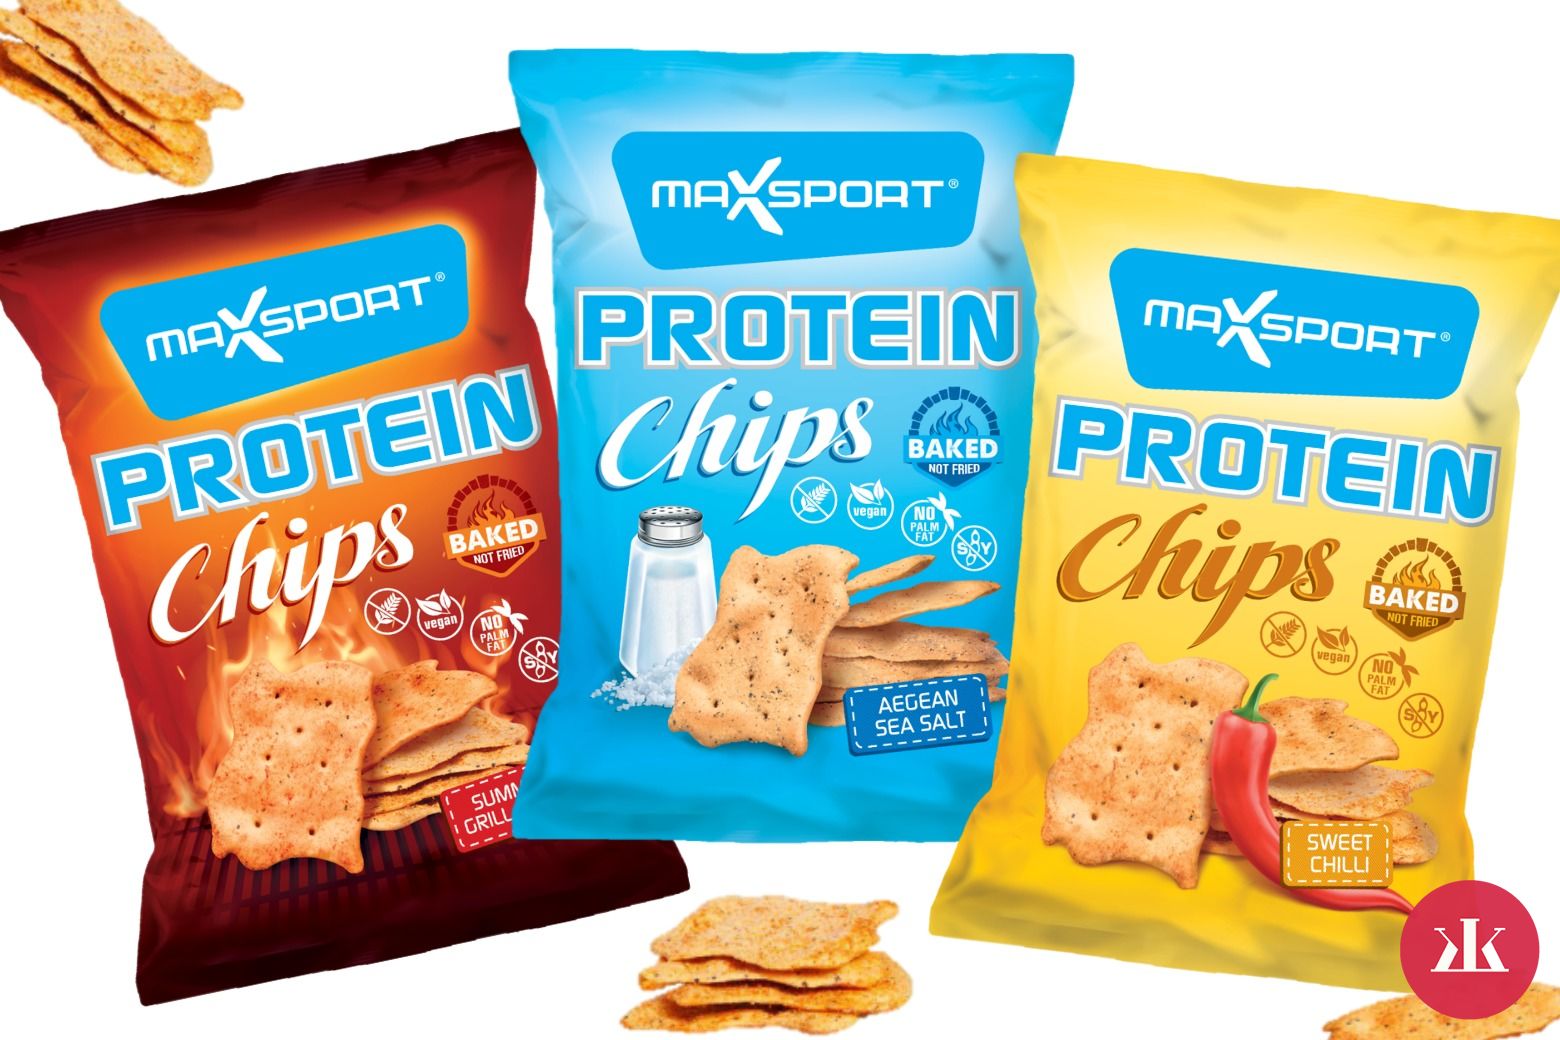 Max sport protein chips